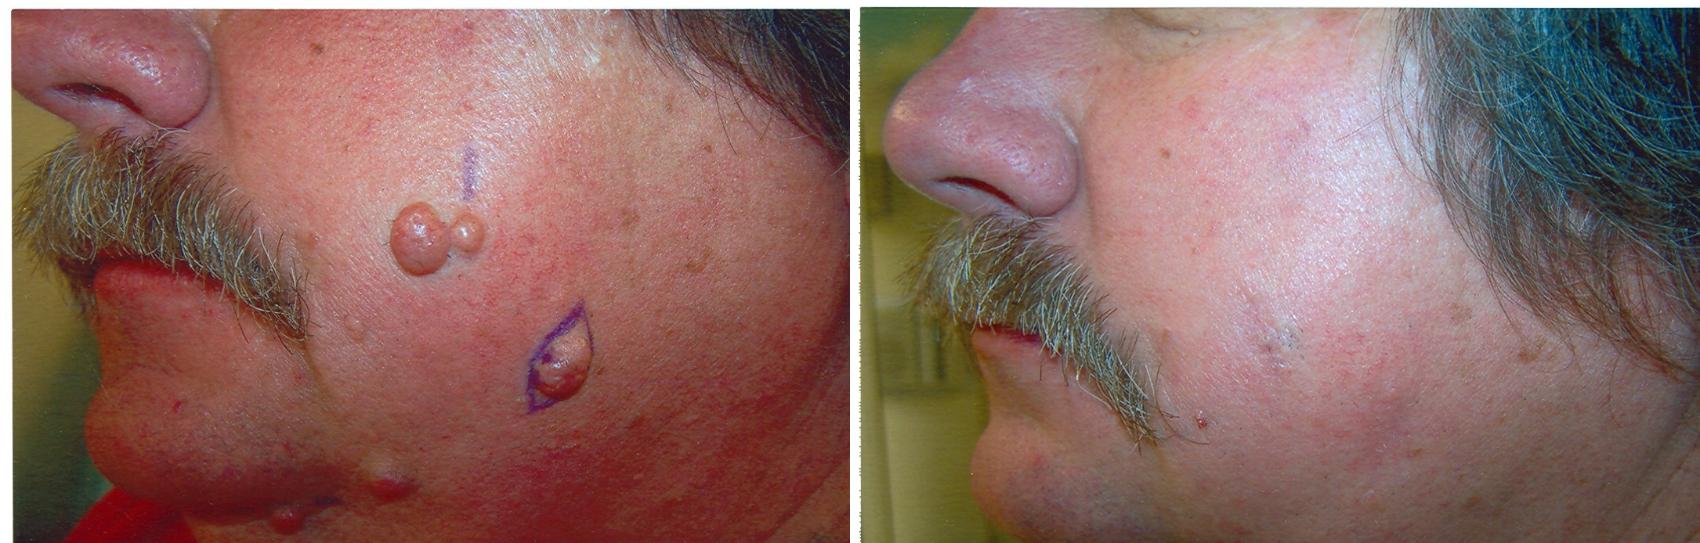 Cosmetic Removal of Moles & Skin Tags Before & After ...